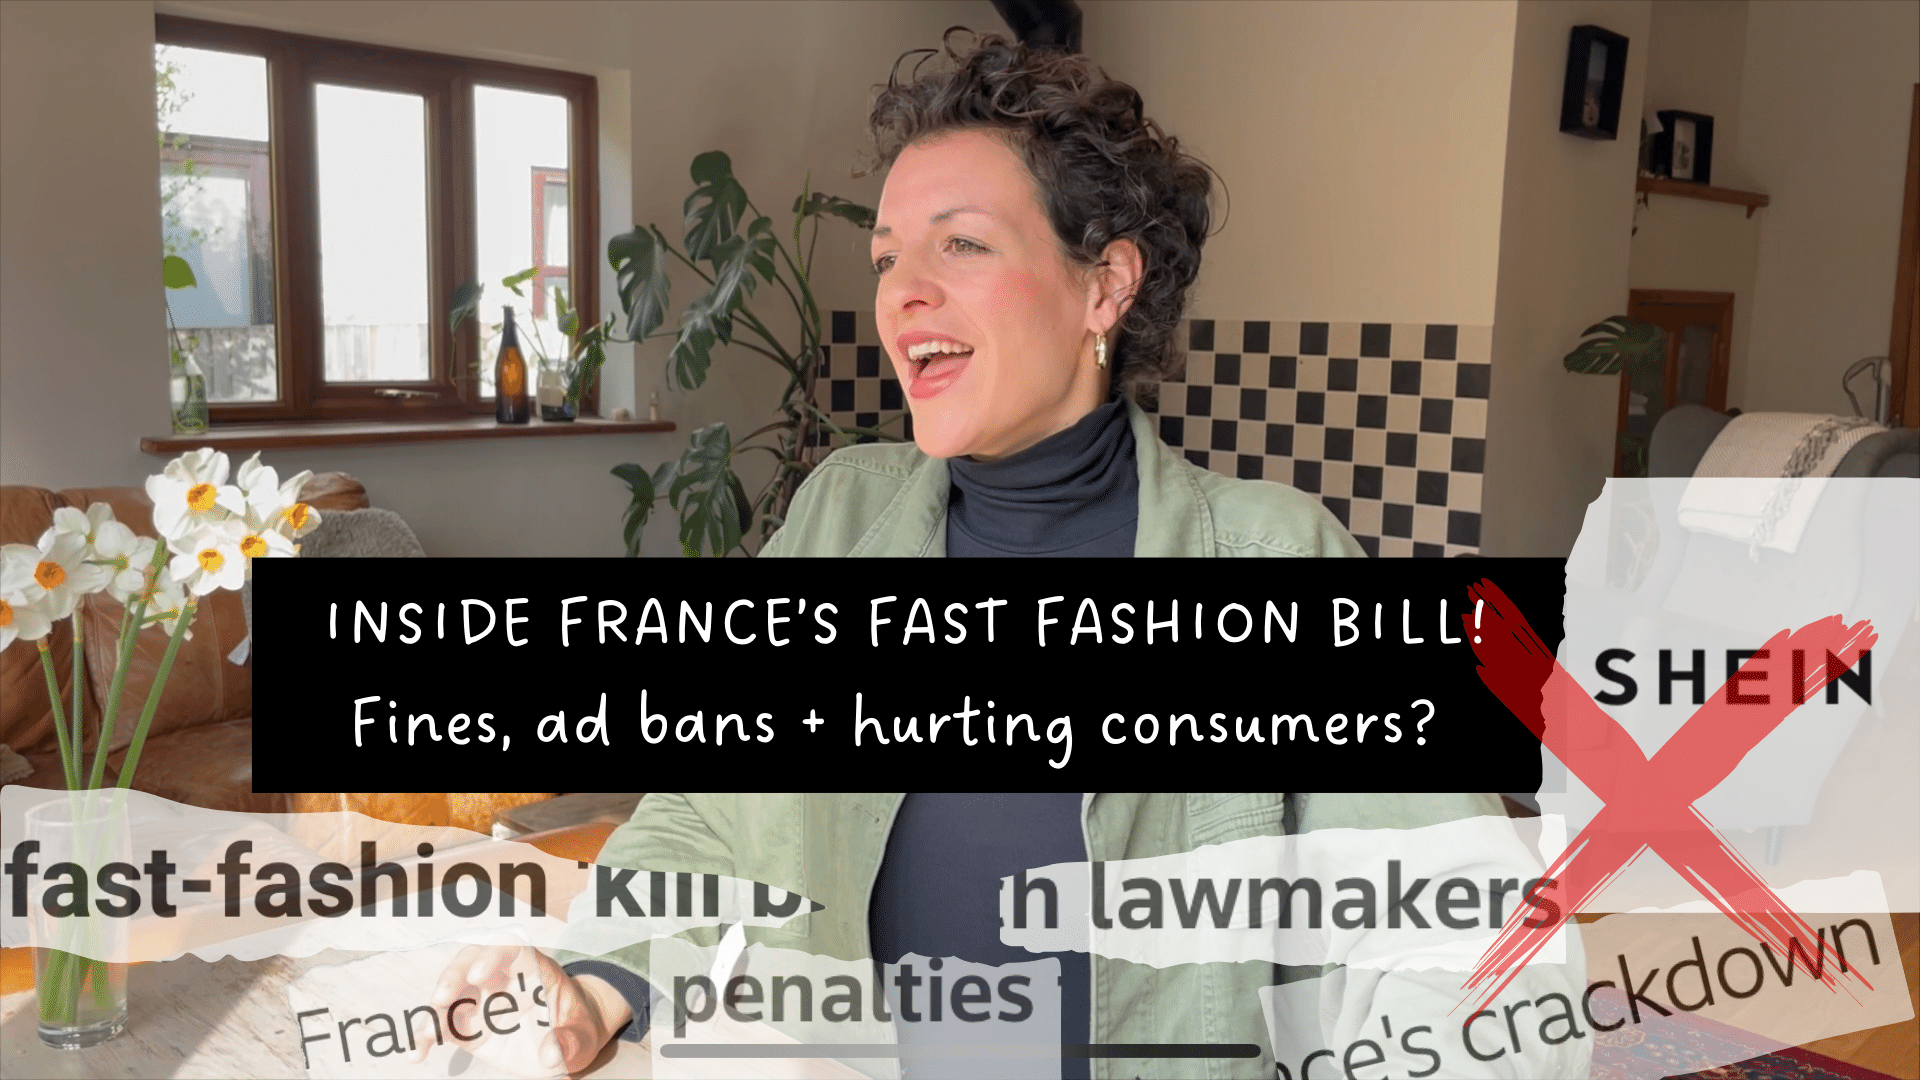 Have you seen France’s Anti Fast Fashion Bill? Here’s a quick run down!